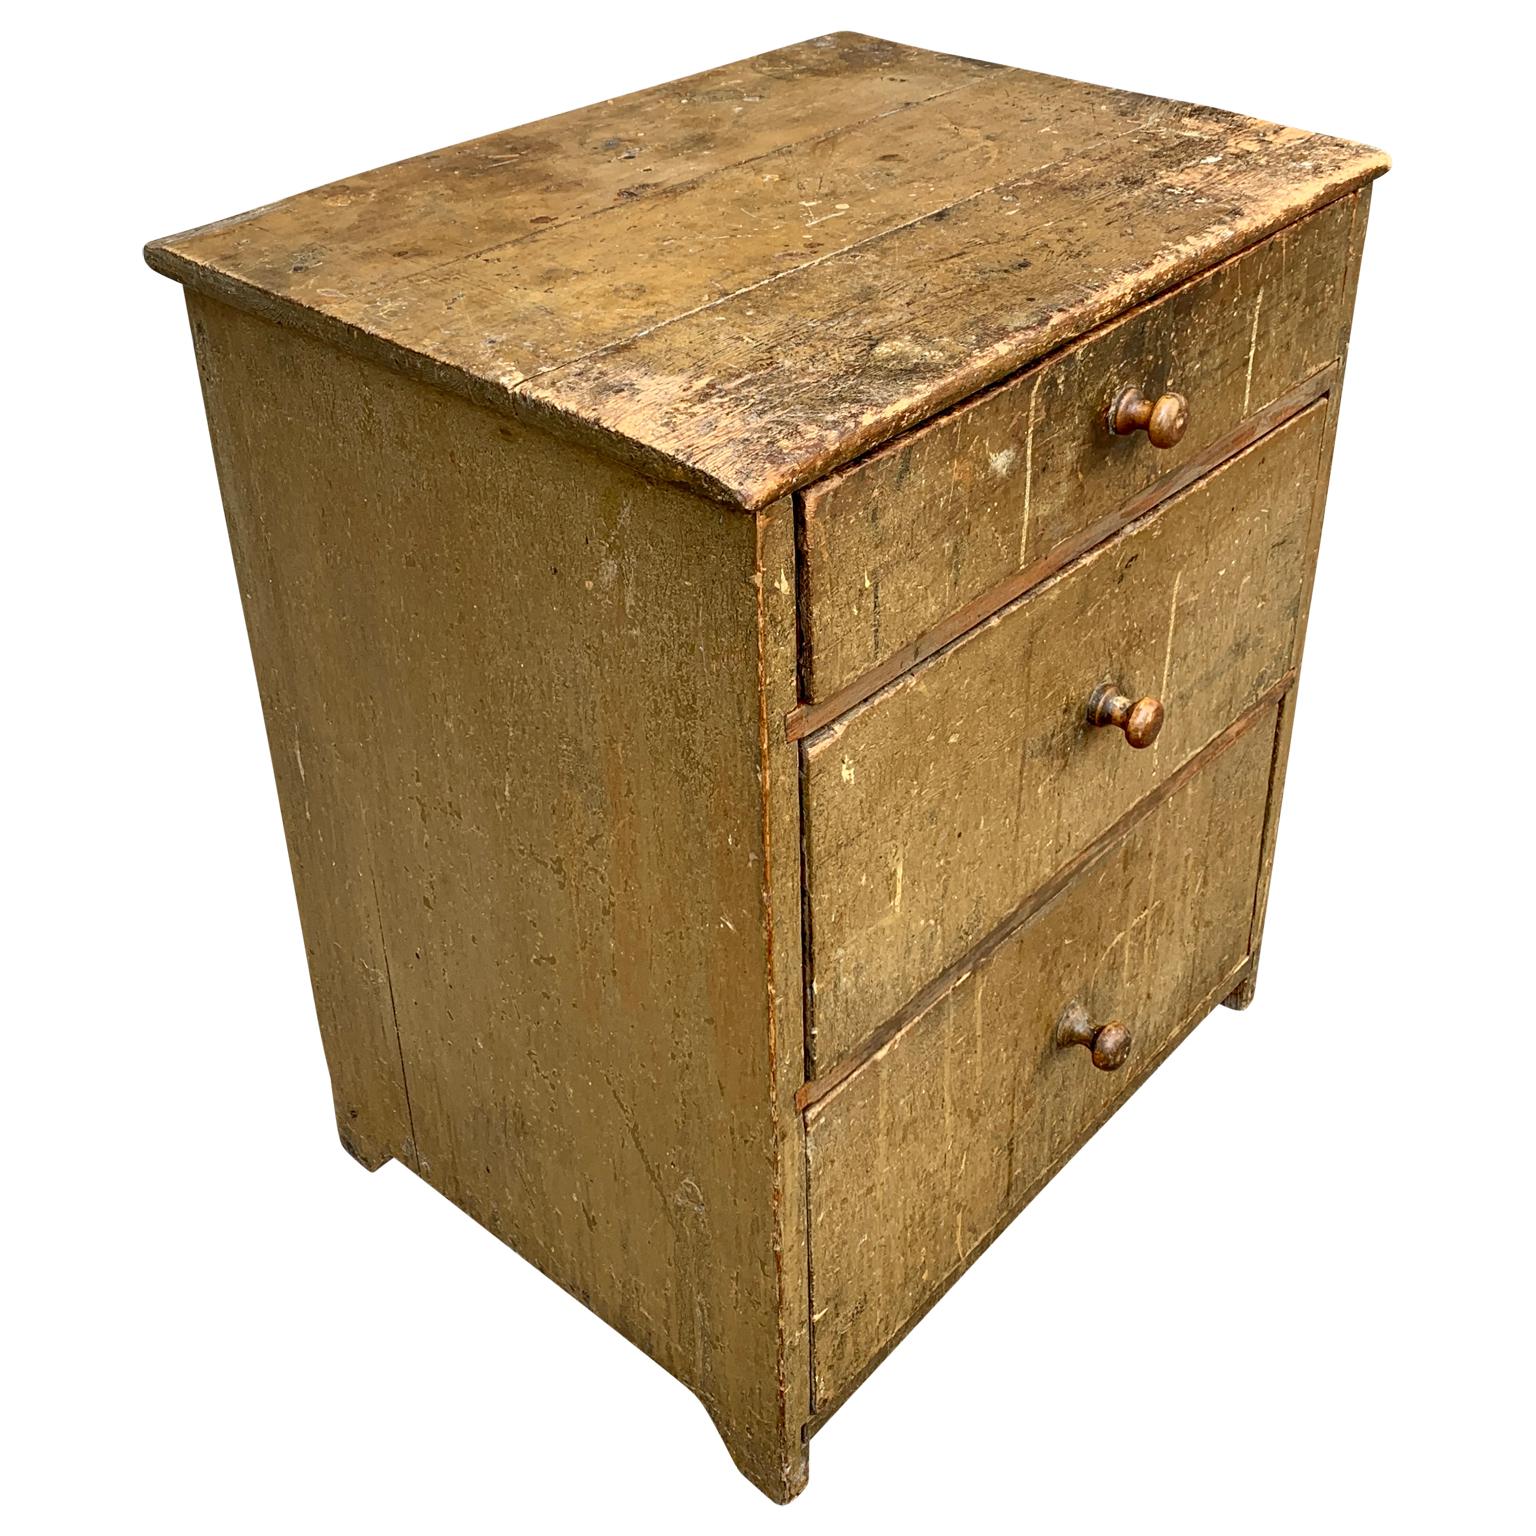 An early 19th century original painted small Scandinavian chest of drawers from the region of Värmland in Sweden.
This small Gustavian 3 drawer dresser can be perfect as a nightstand in a bedroom or can be placed in a hall for keeping keys and